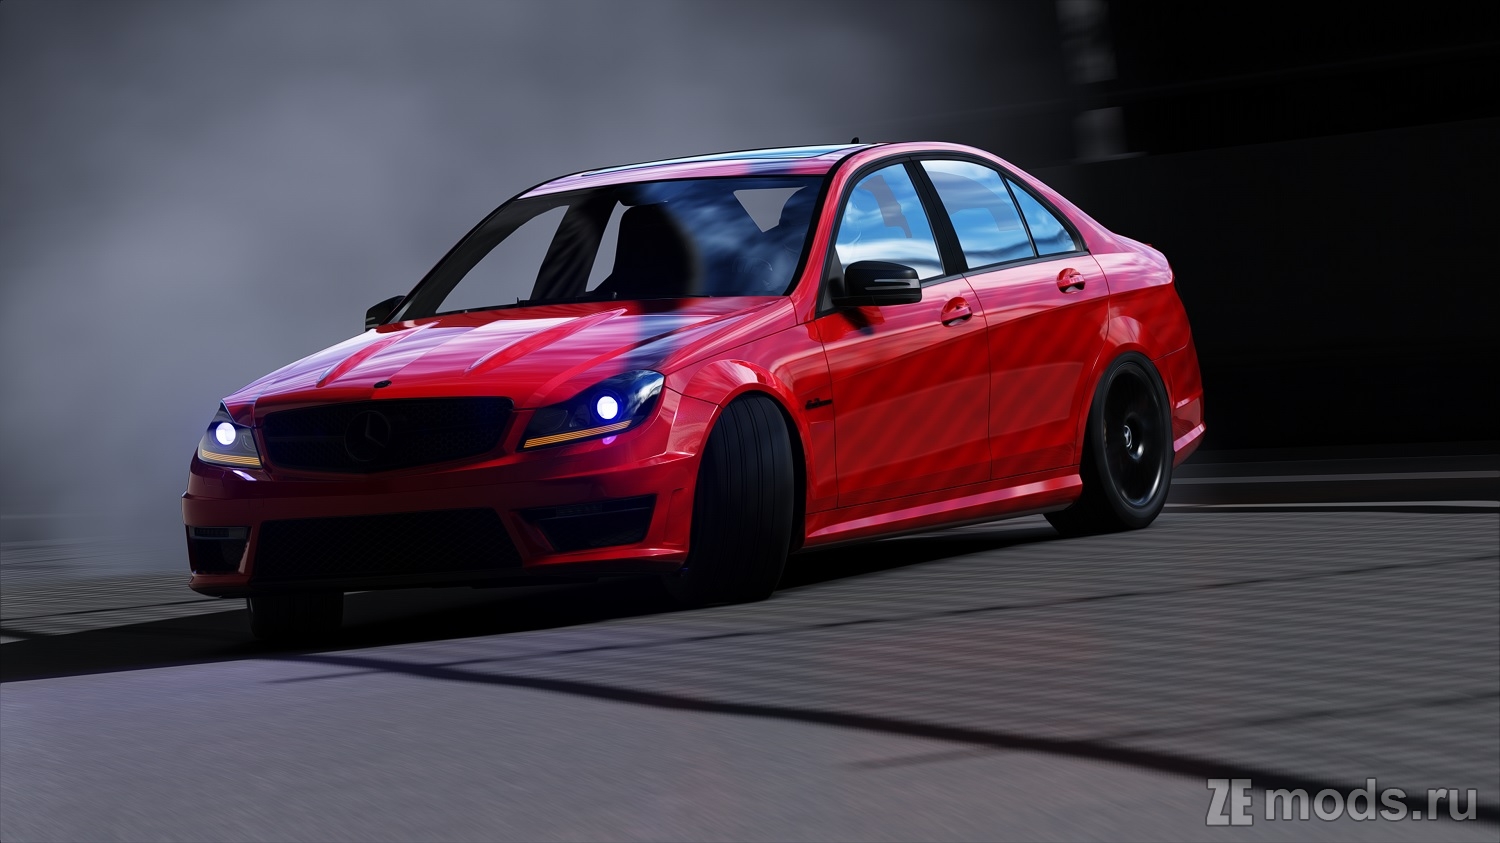 Мод Mercedes-Benz C63 PACK PERFO / 514 CH - 621Nm для Assetto Corsa